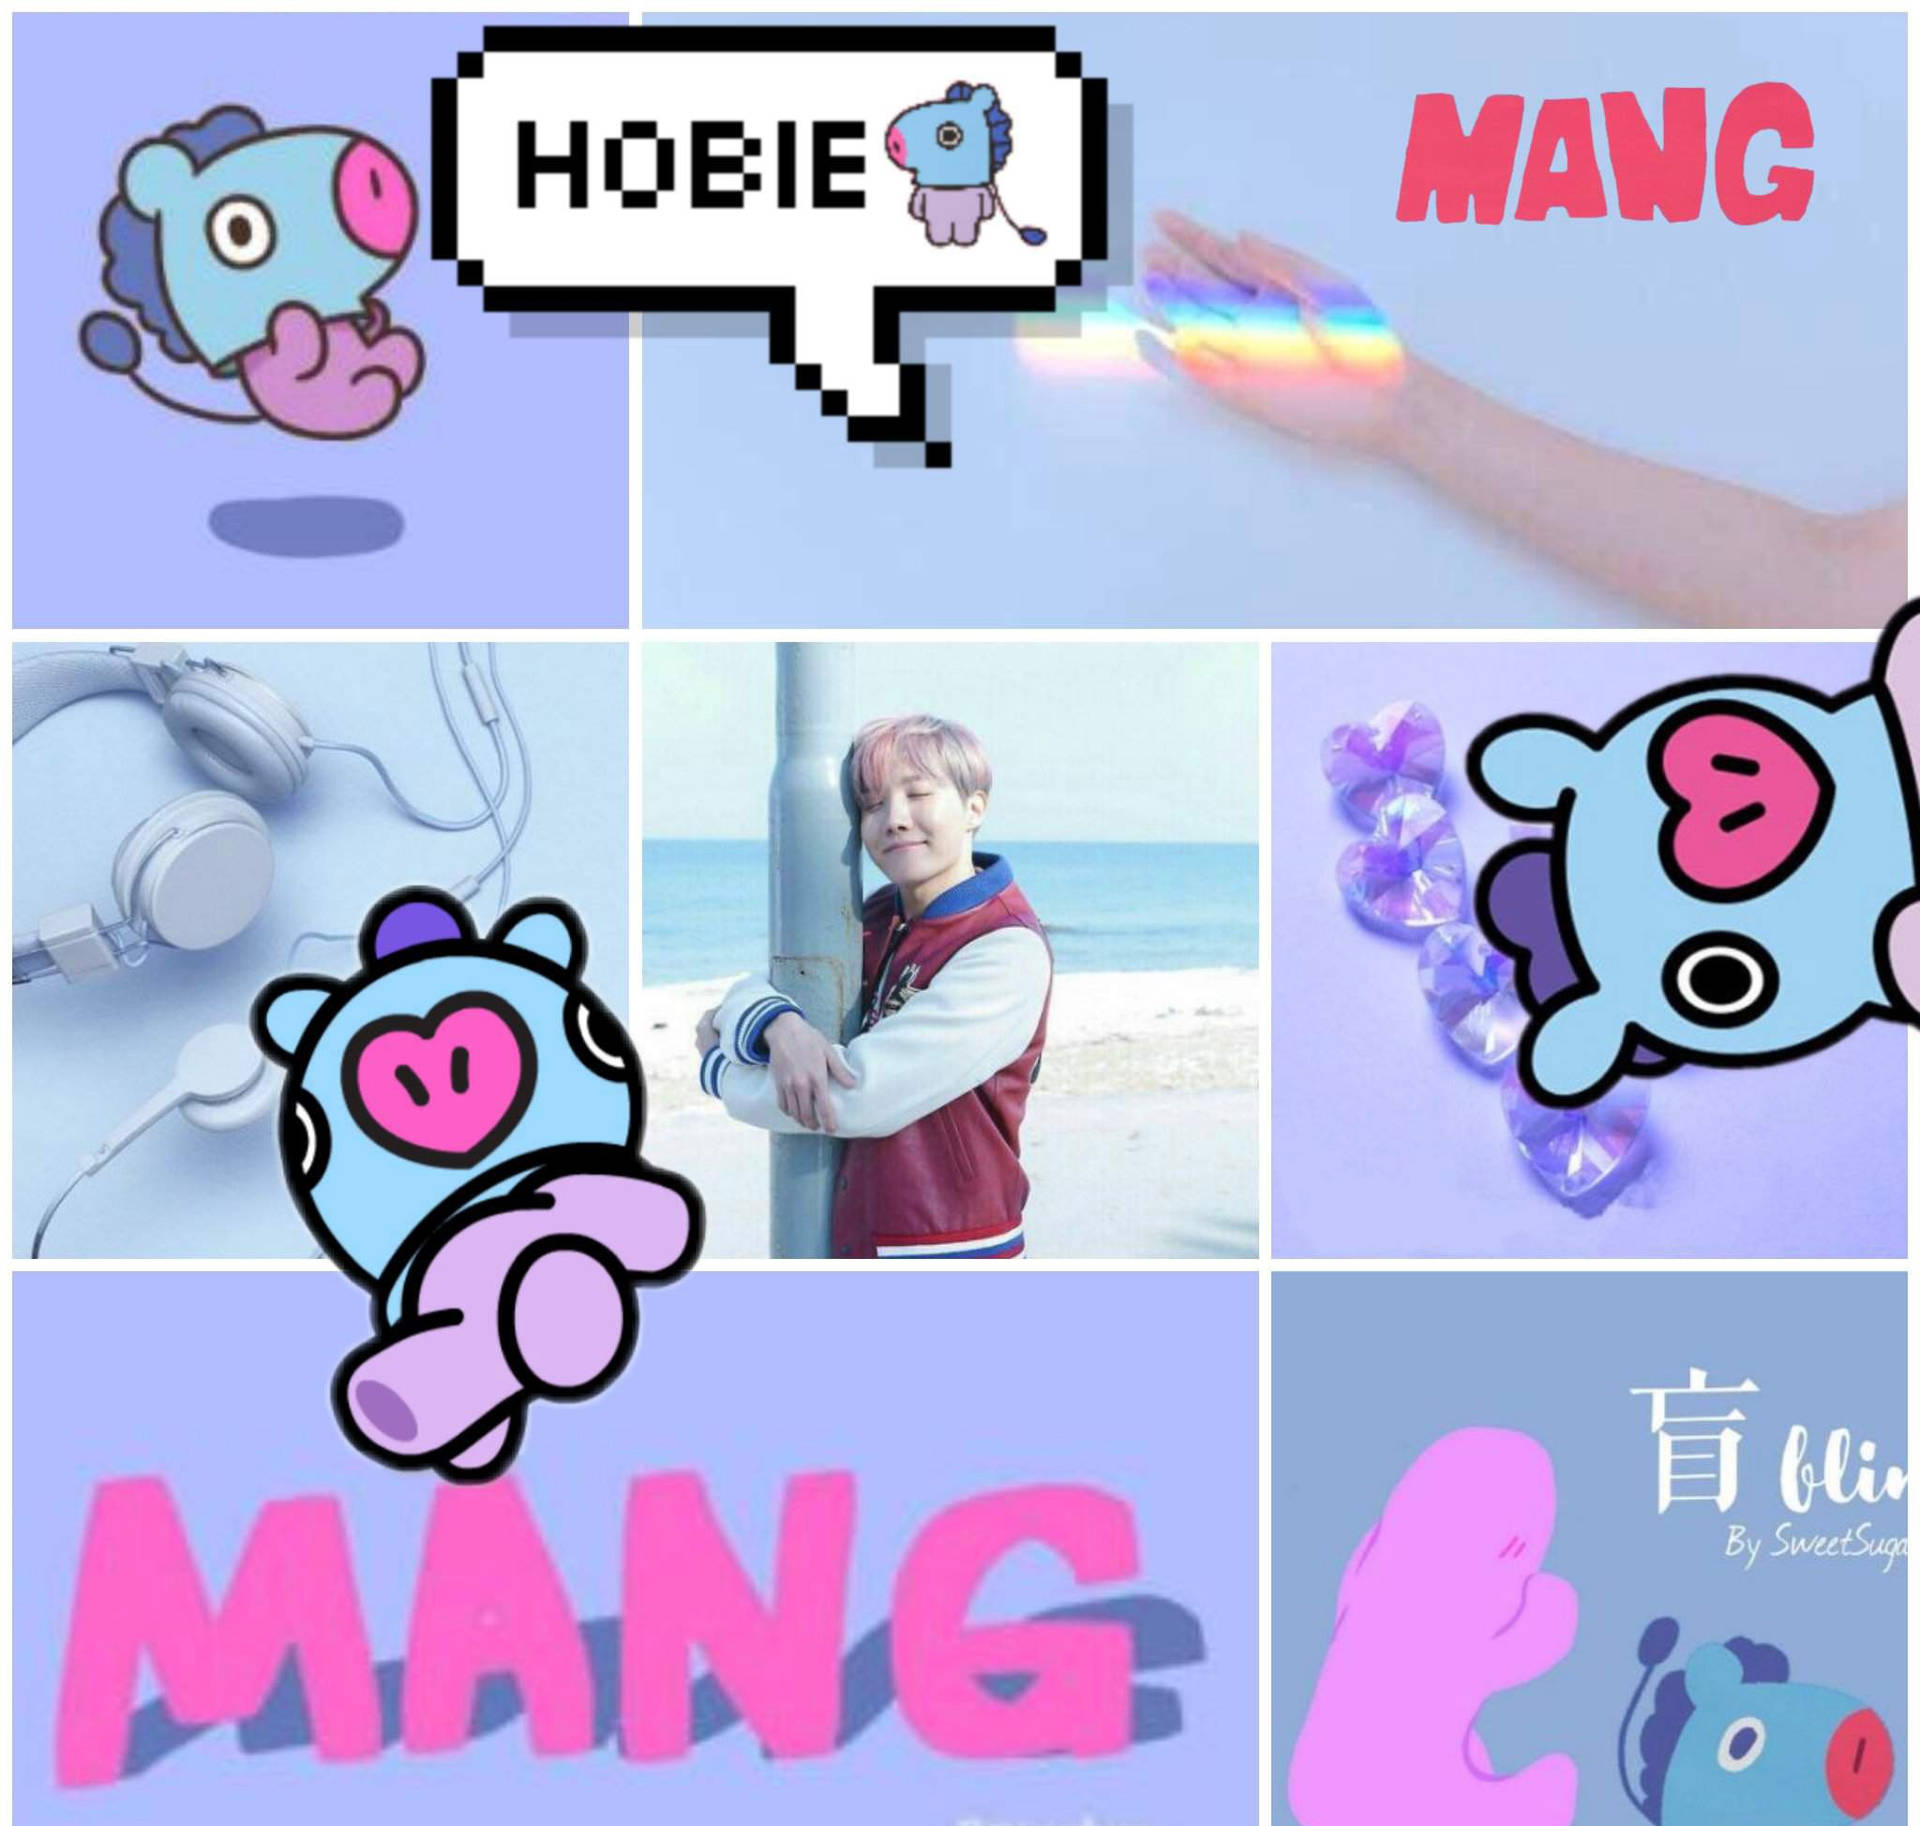 Hang Out With The Ever-adorable Mang Bt21 In This Bright And Playful Desktop Wallpaper. Background